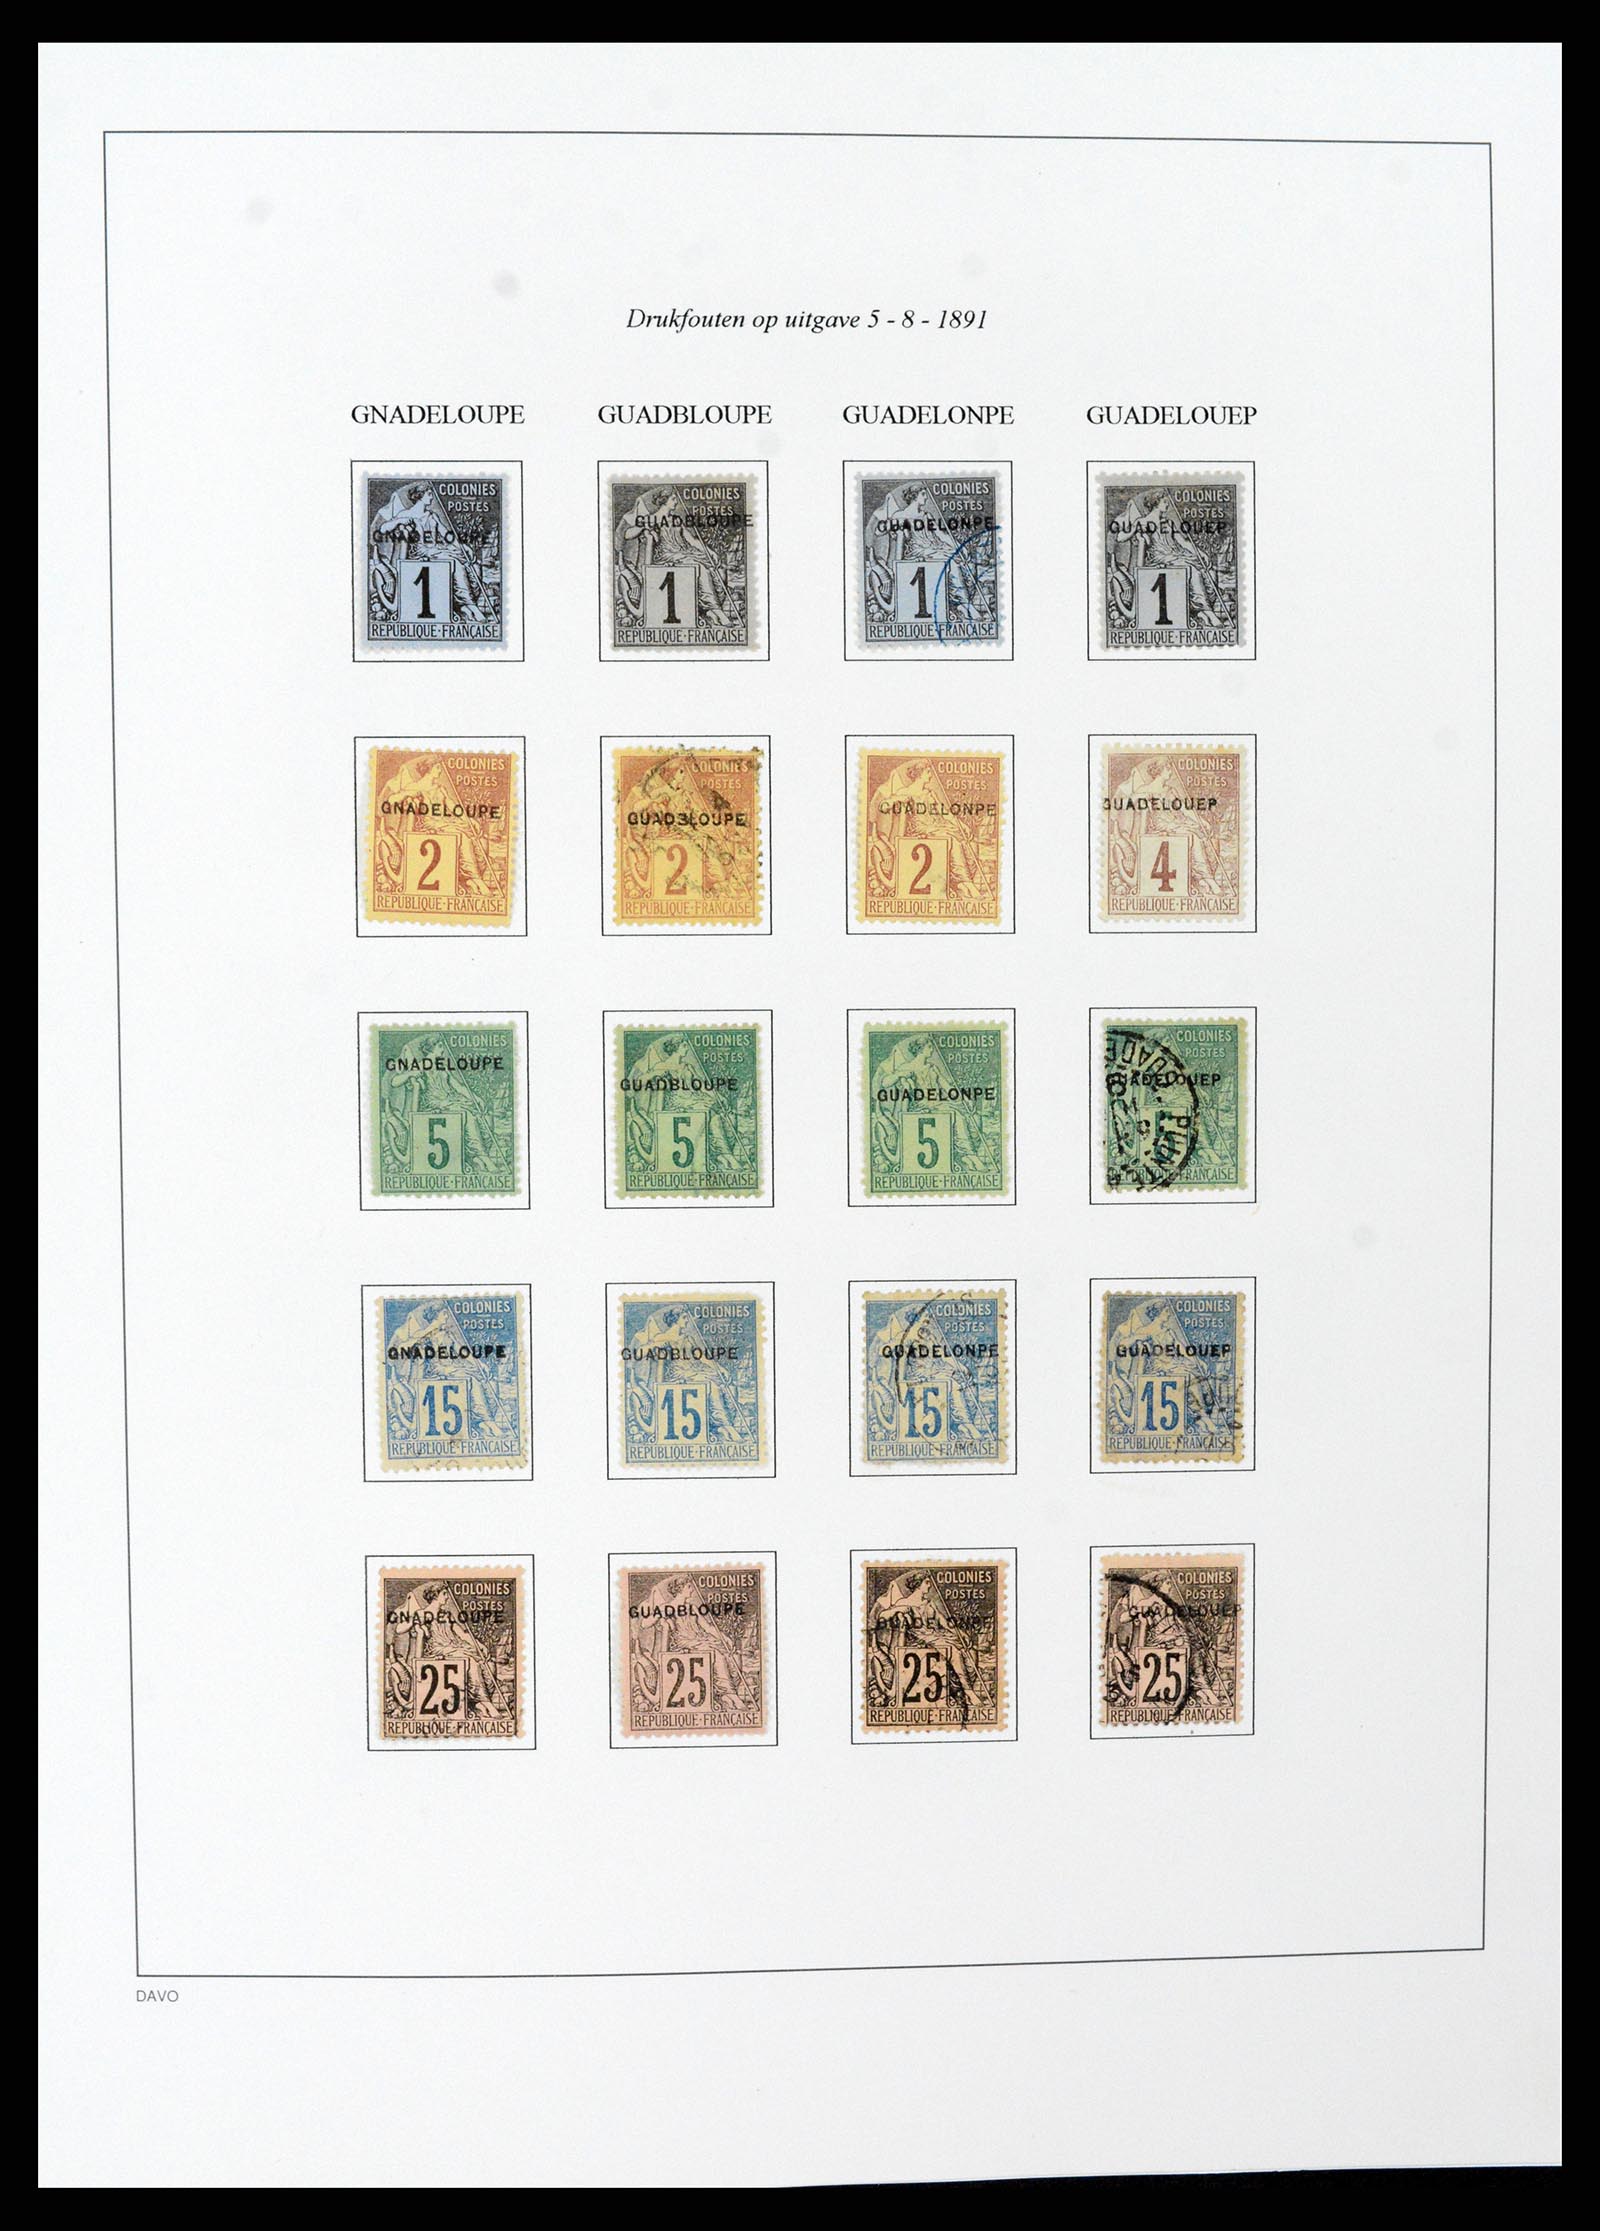 37480 042 - Stamp collection 37480 Guadeloupe supercollection 1823-1947.